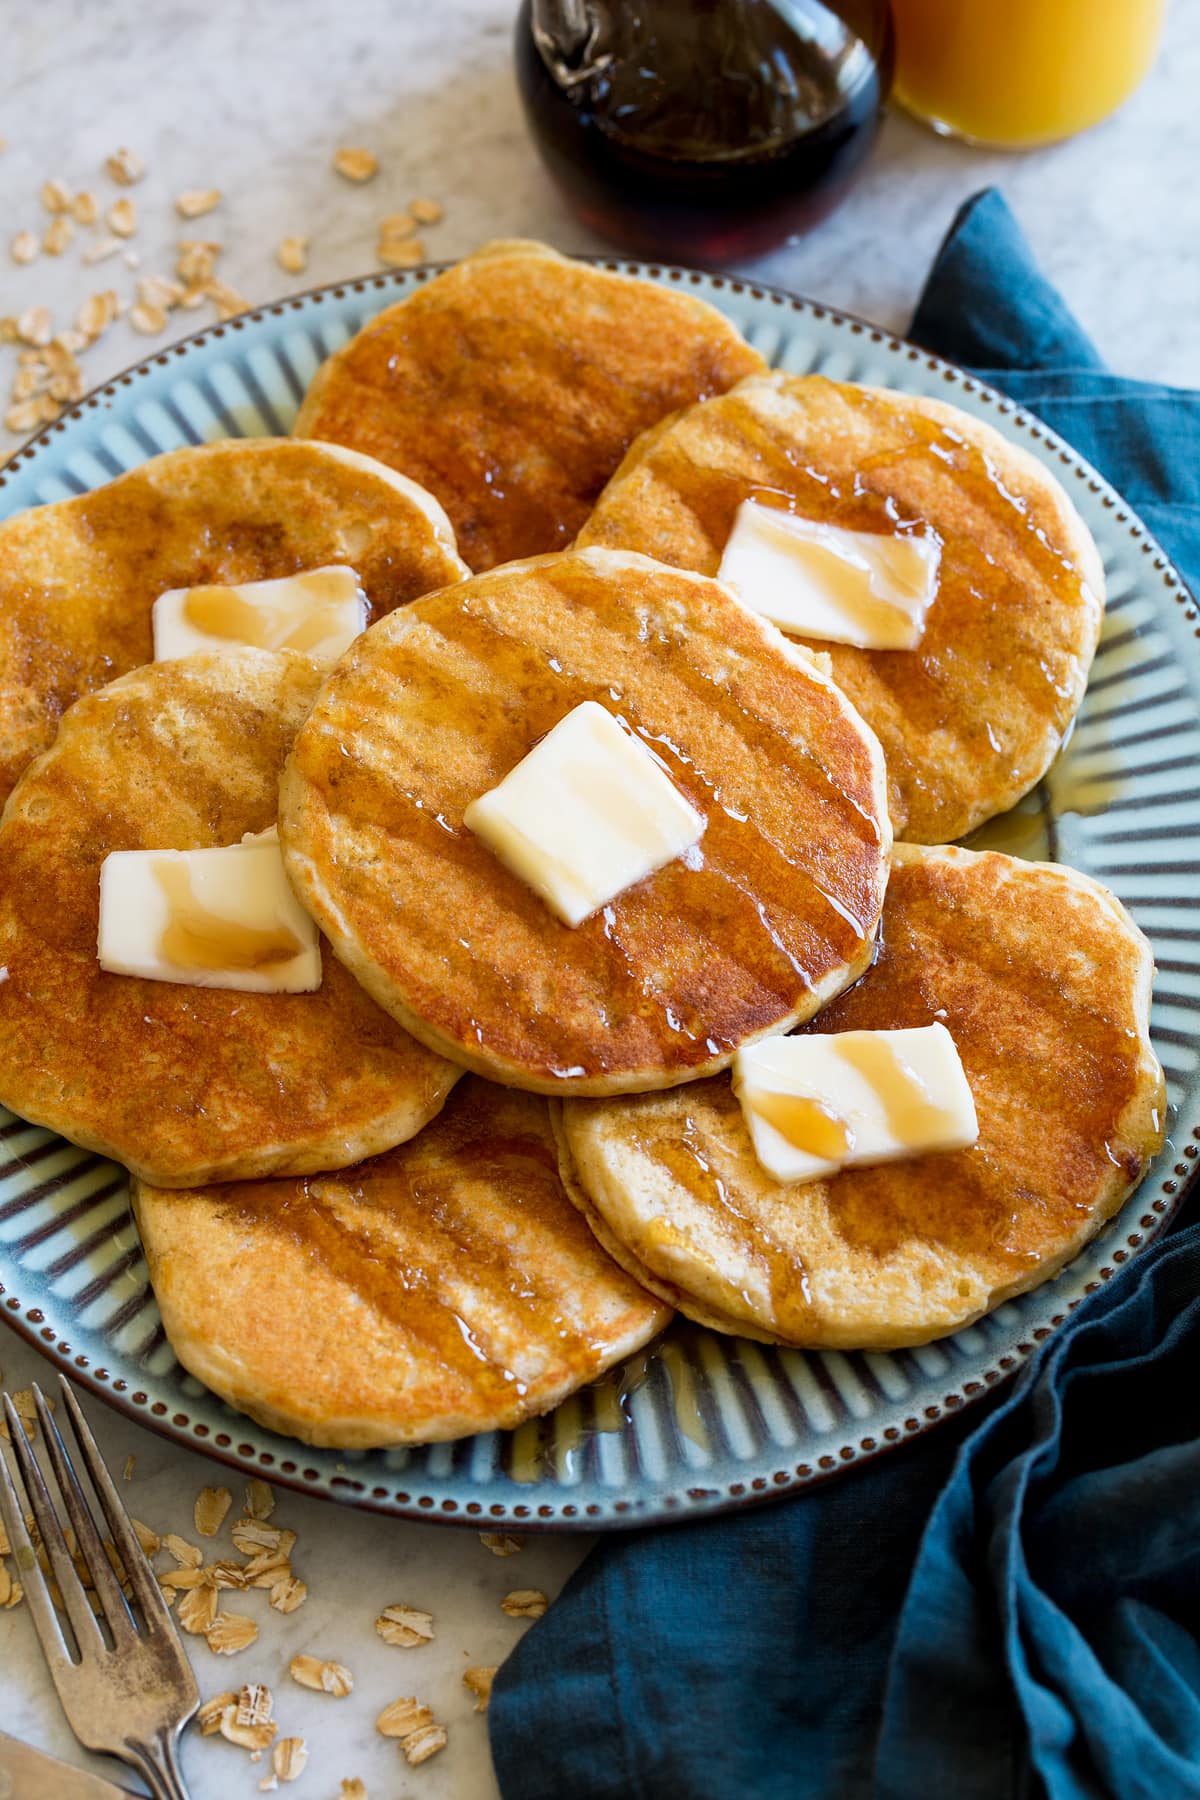 Pancakes shown at a side angle on a large blue plate.